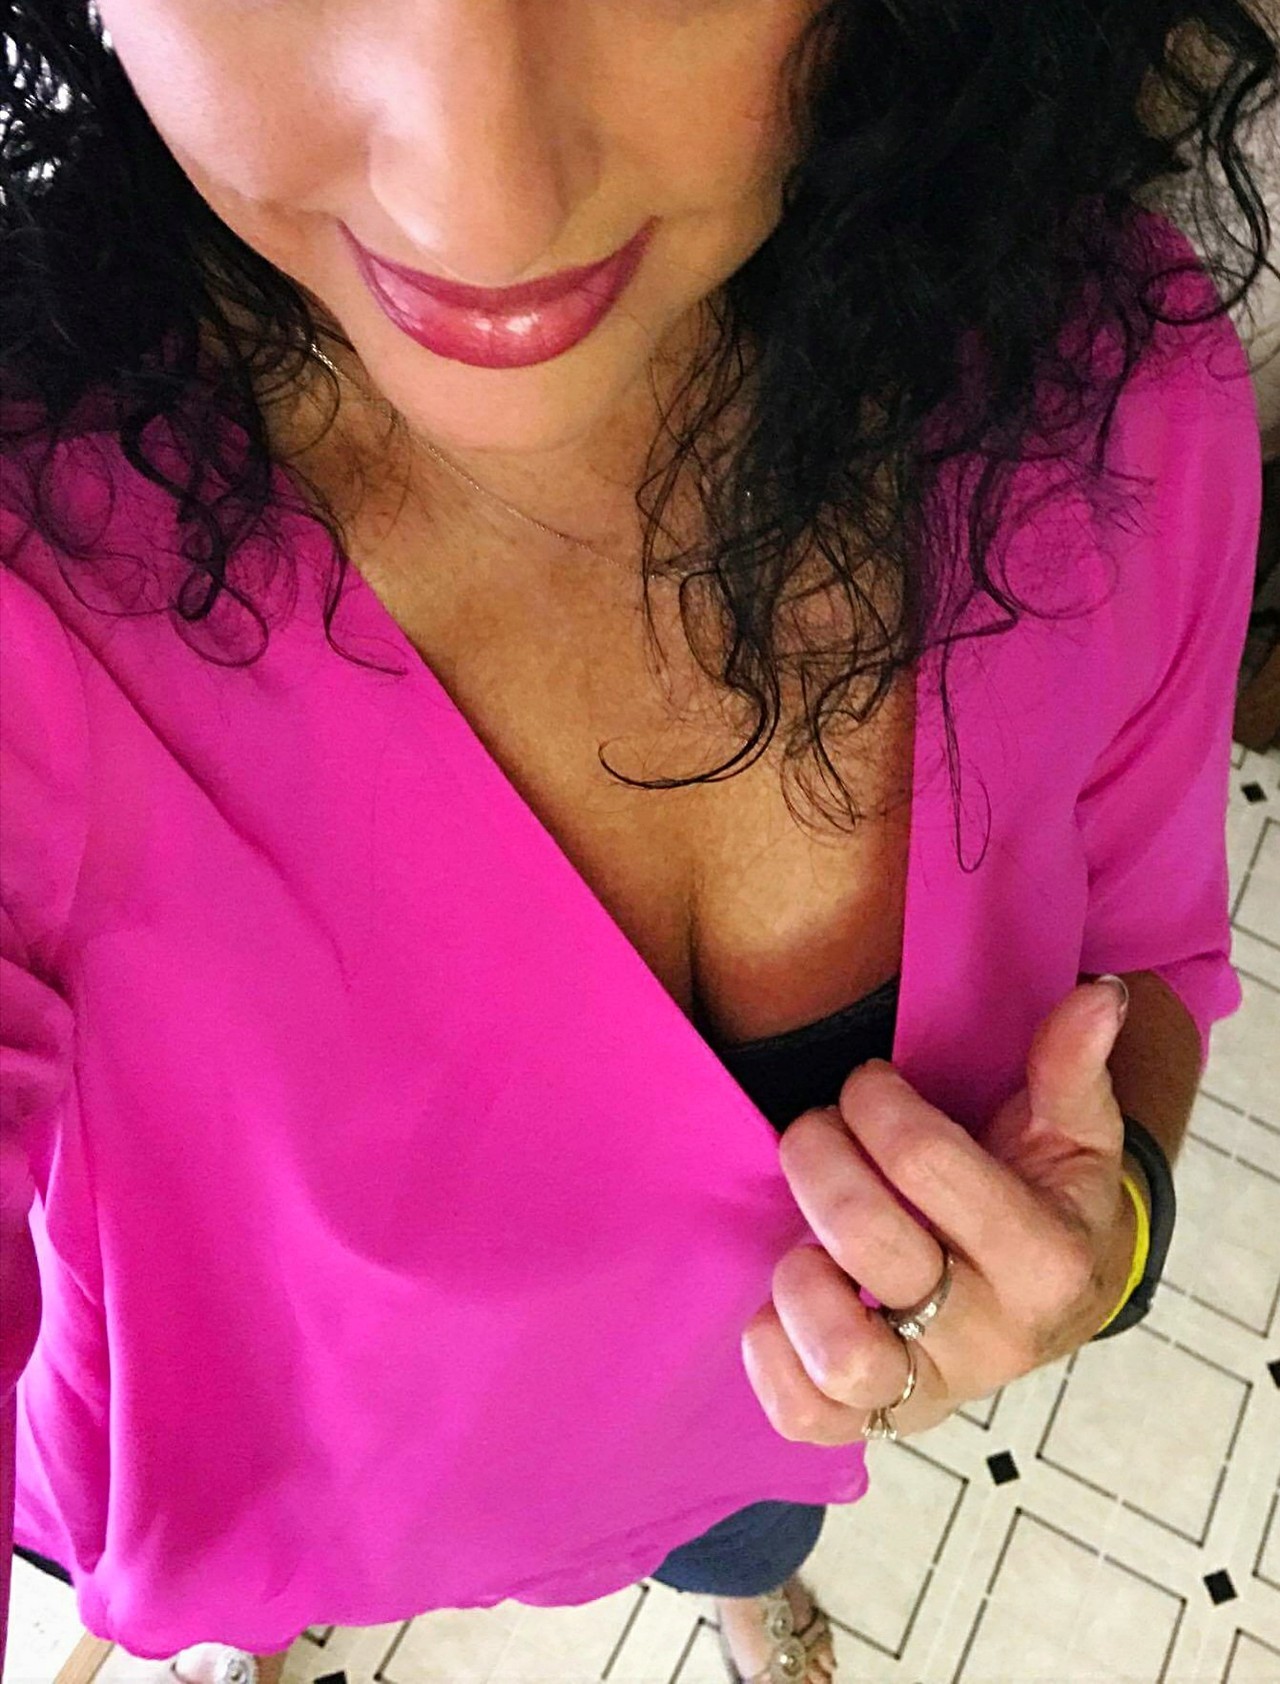 lilmisssuckit777:  4-13-2017  Spring colors in full effect today!  Feeling naughty!